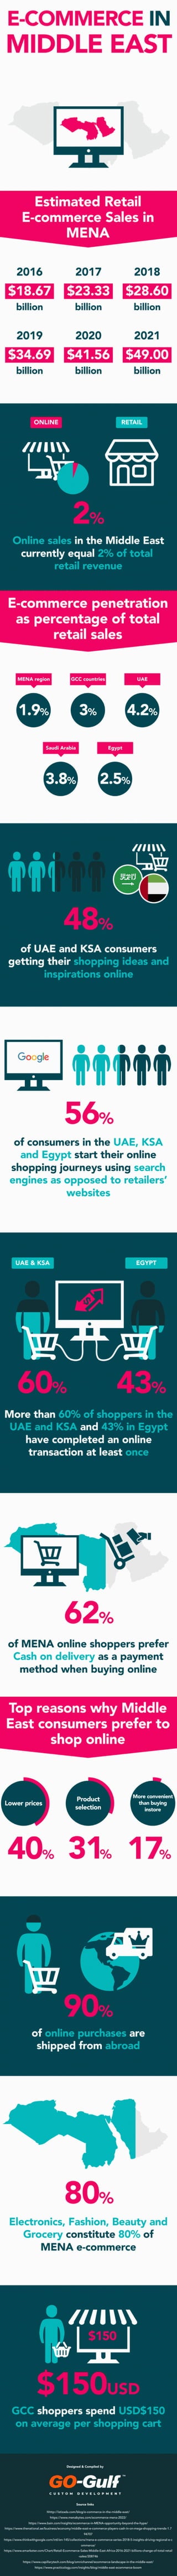 E-commerce in Middle East – Statistics and Trends [Infographic]